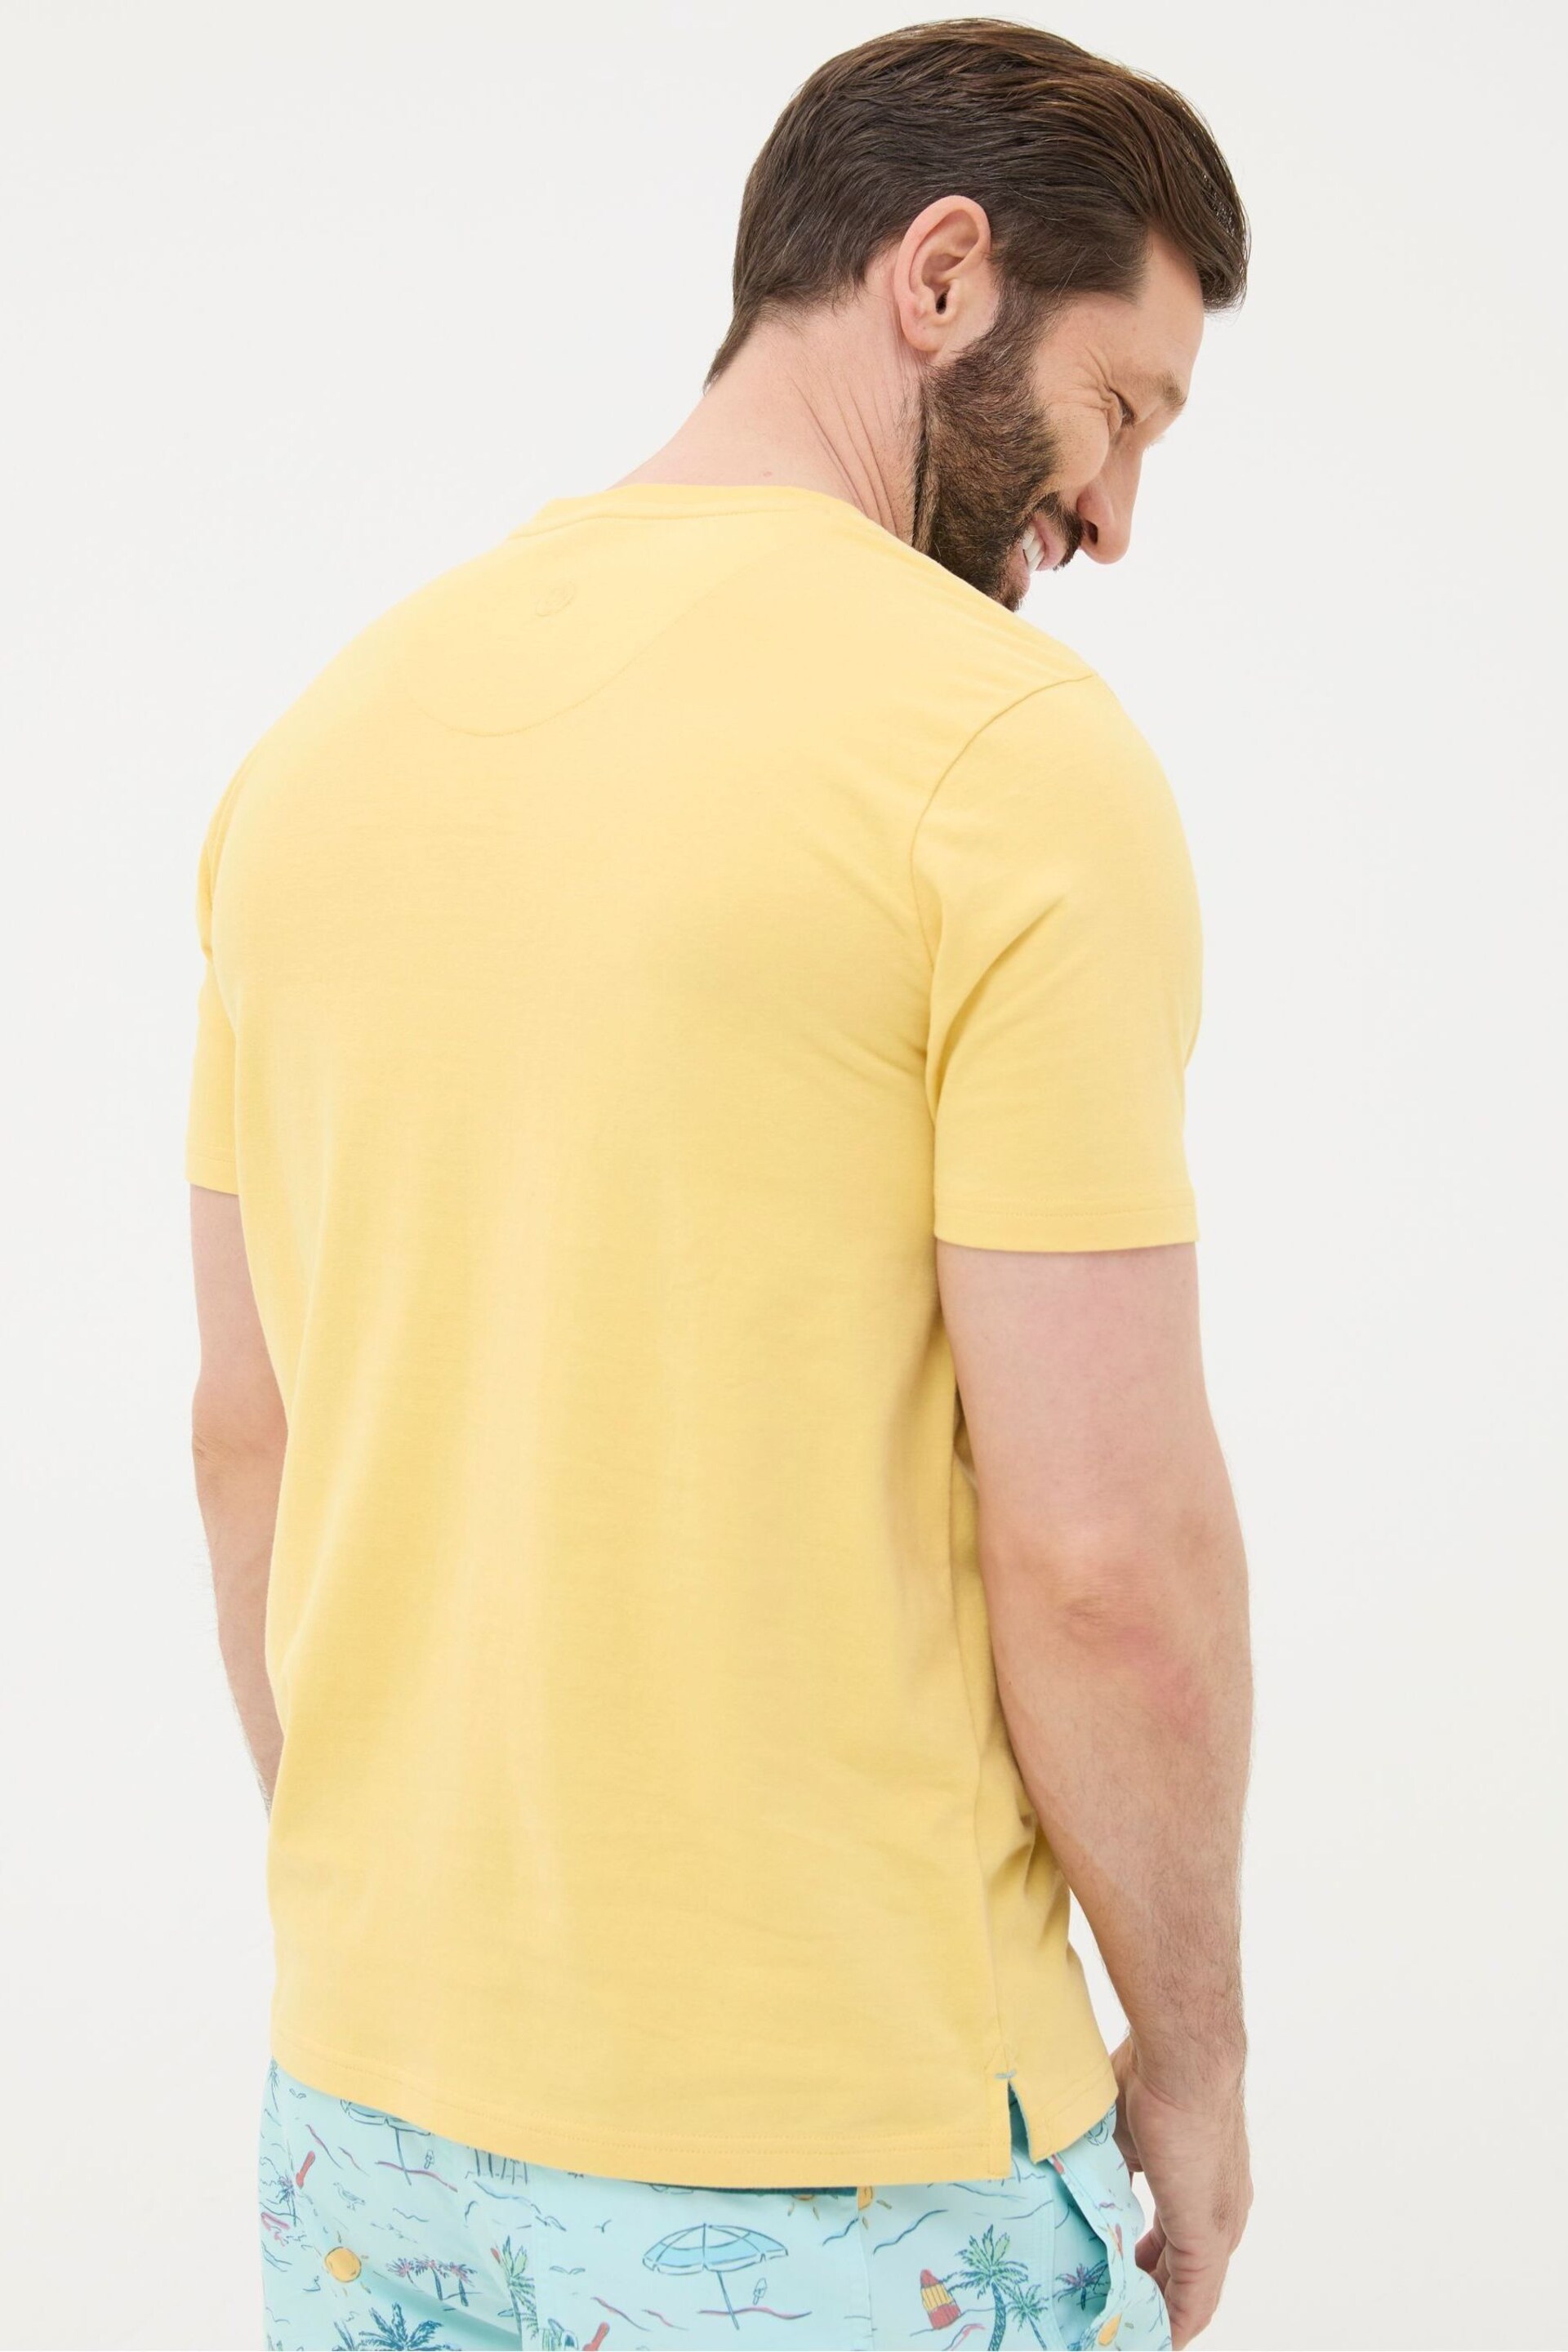 FatFace Yellow Judes Chest Stripe T-Shirt - Image 2 of 5